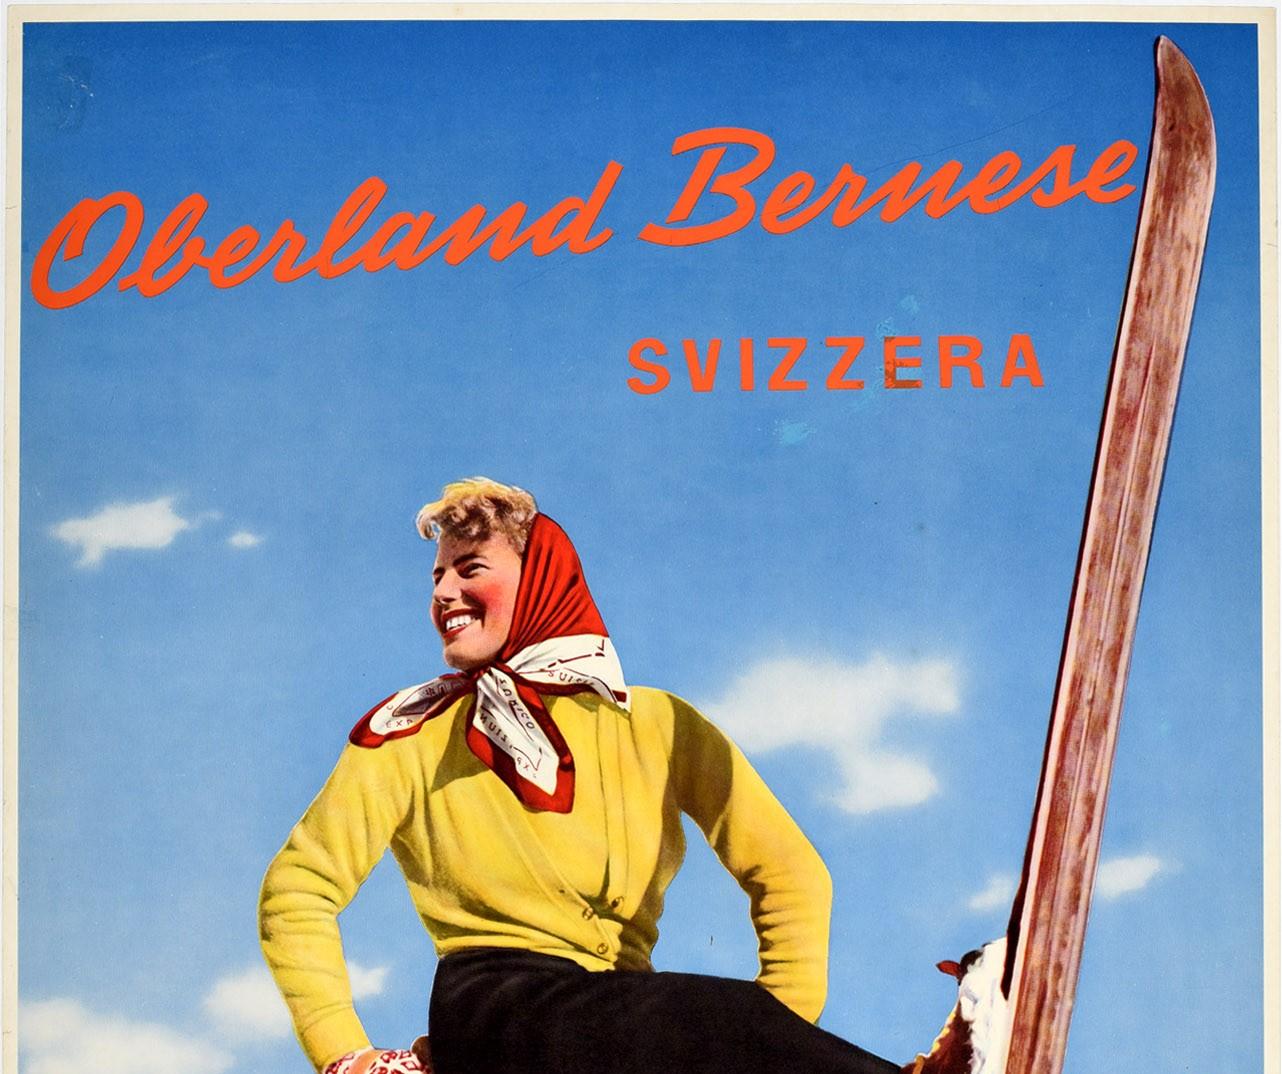 Original vintage ski travel poster - Oberland Bernese Svizzera - featuring a colourful image of a smiling lady in a headscarf leaning back on her poles and holding one ski up in the snow with trees in the background and the stylised lettering across